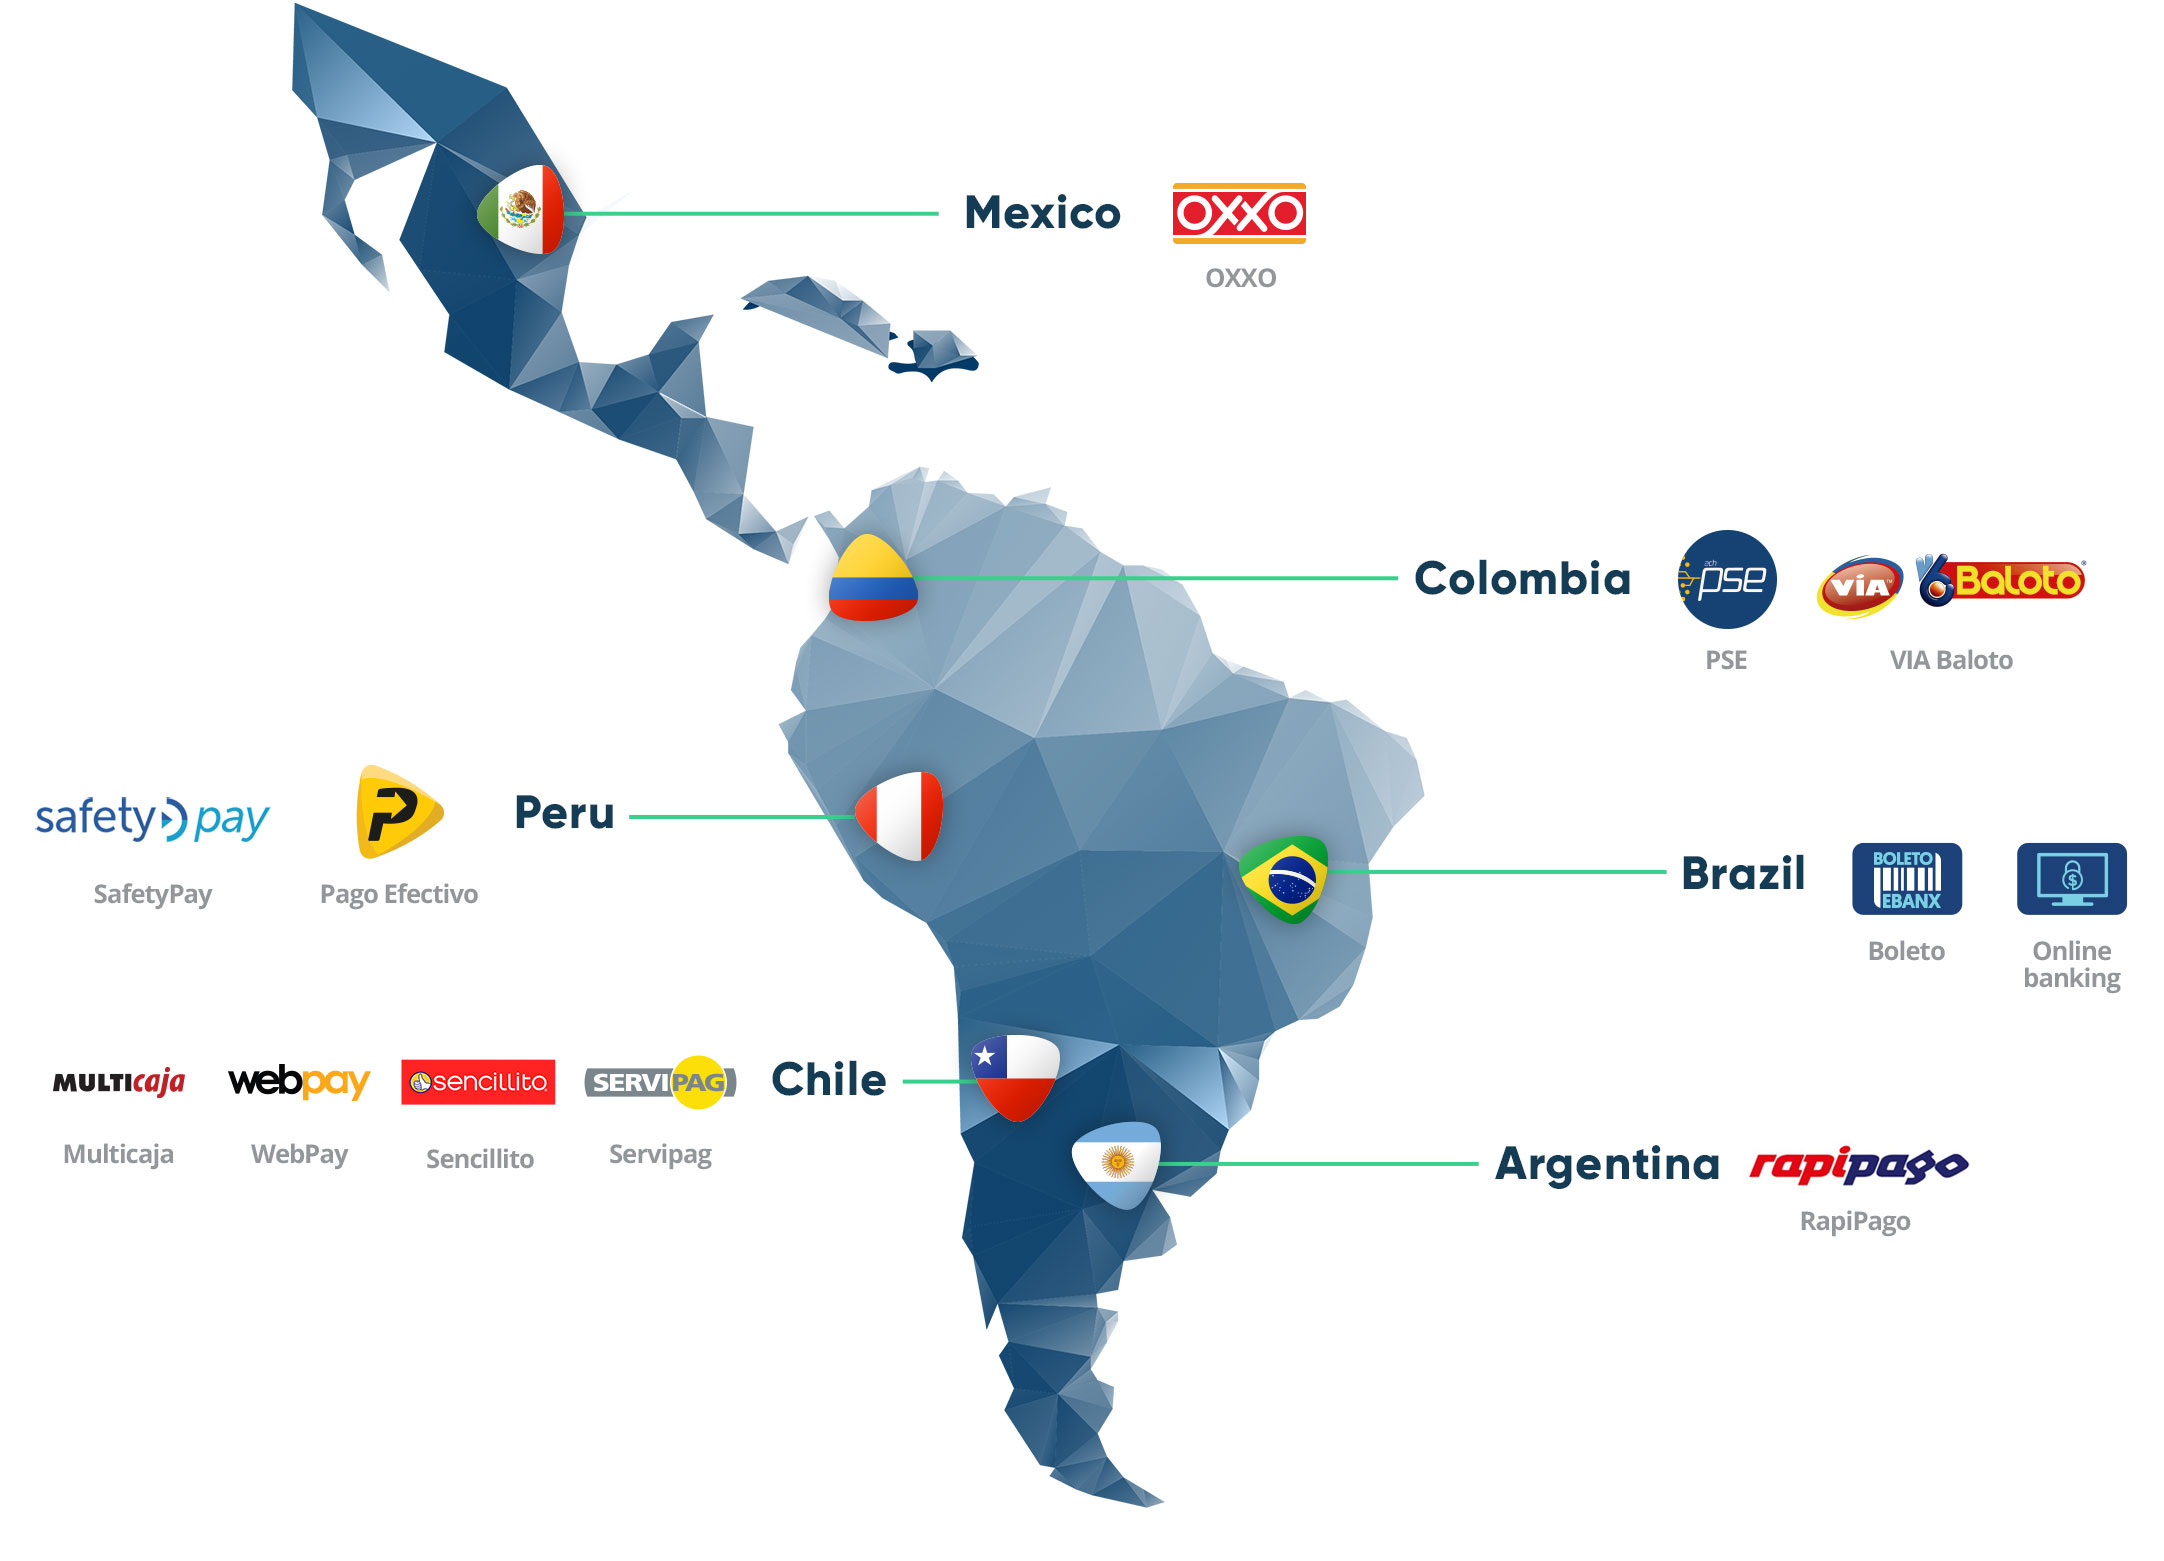 Map of Local Payment Methods in Latin America